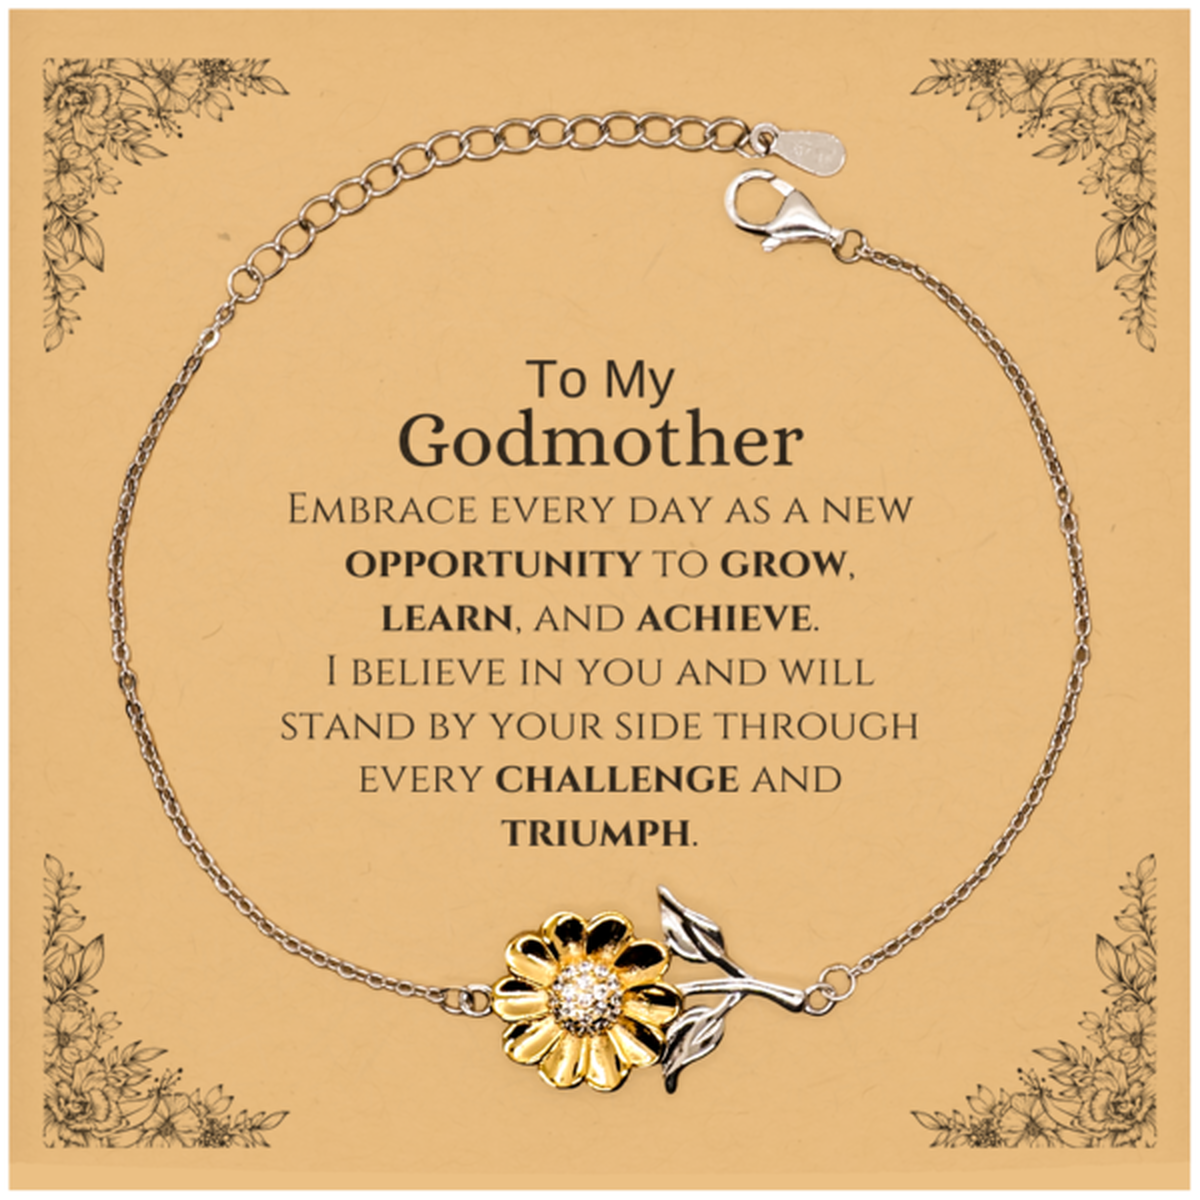 To My Godmother Gifts, I believe in you and will stand by your side, Inspirational Sunflower Bracelet For Godmother, Birthday Christmas Motivational Godmother Gifts